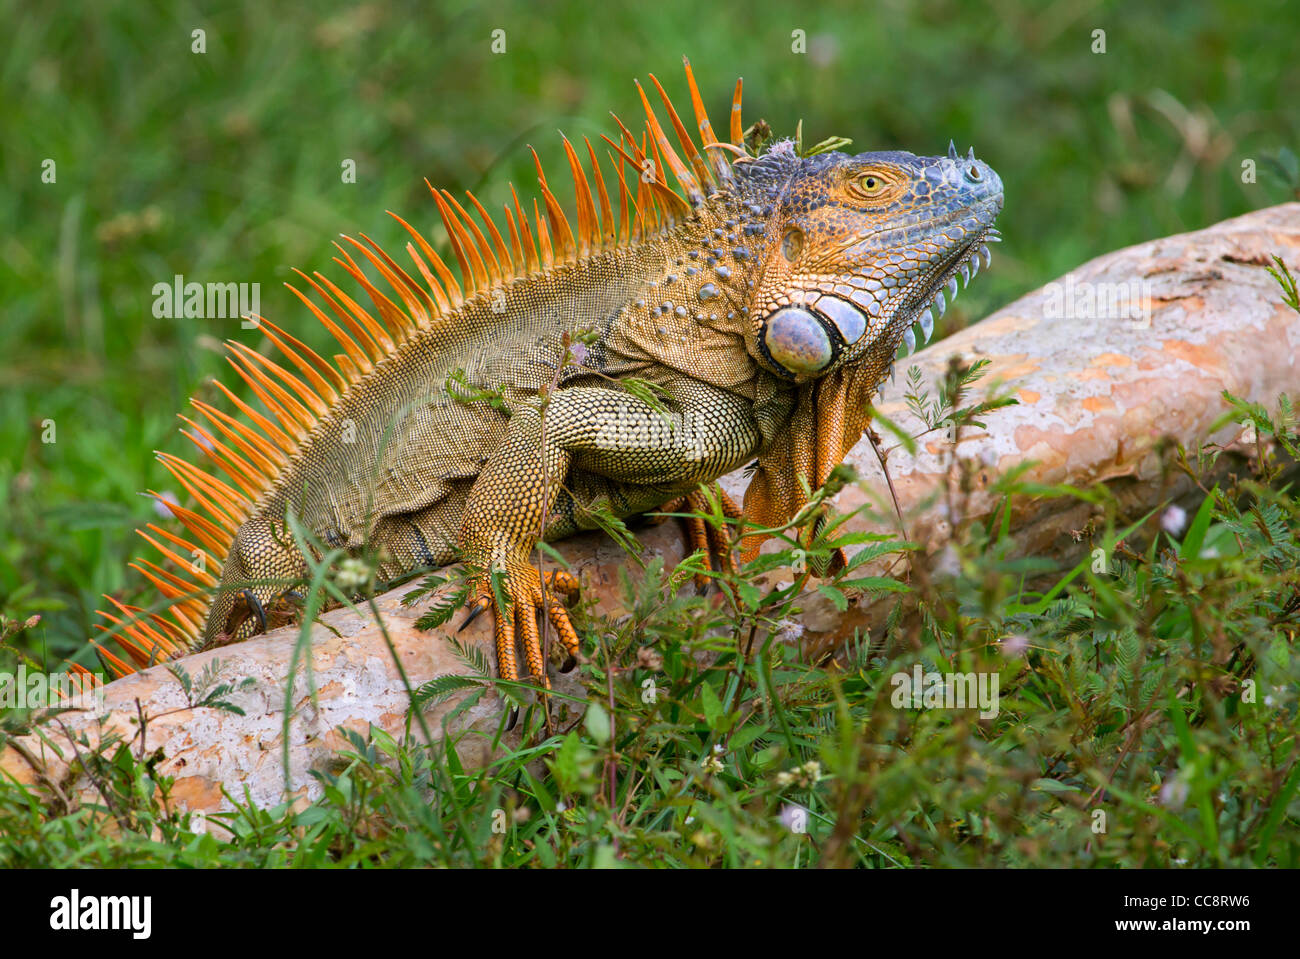 Male green iguana (Iguana iguana) demonstrating his mating coloration in attempt to attract females. Stock Photo